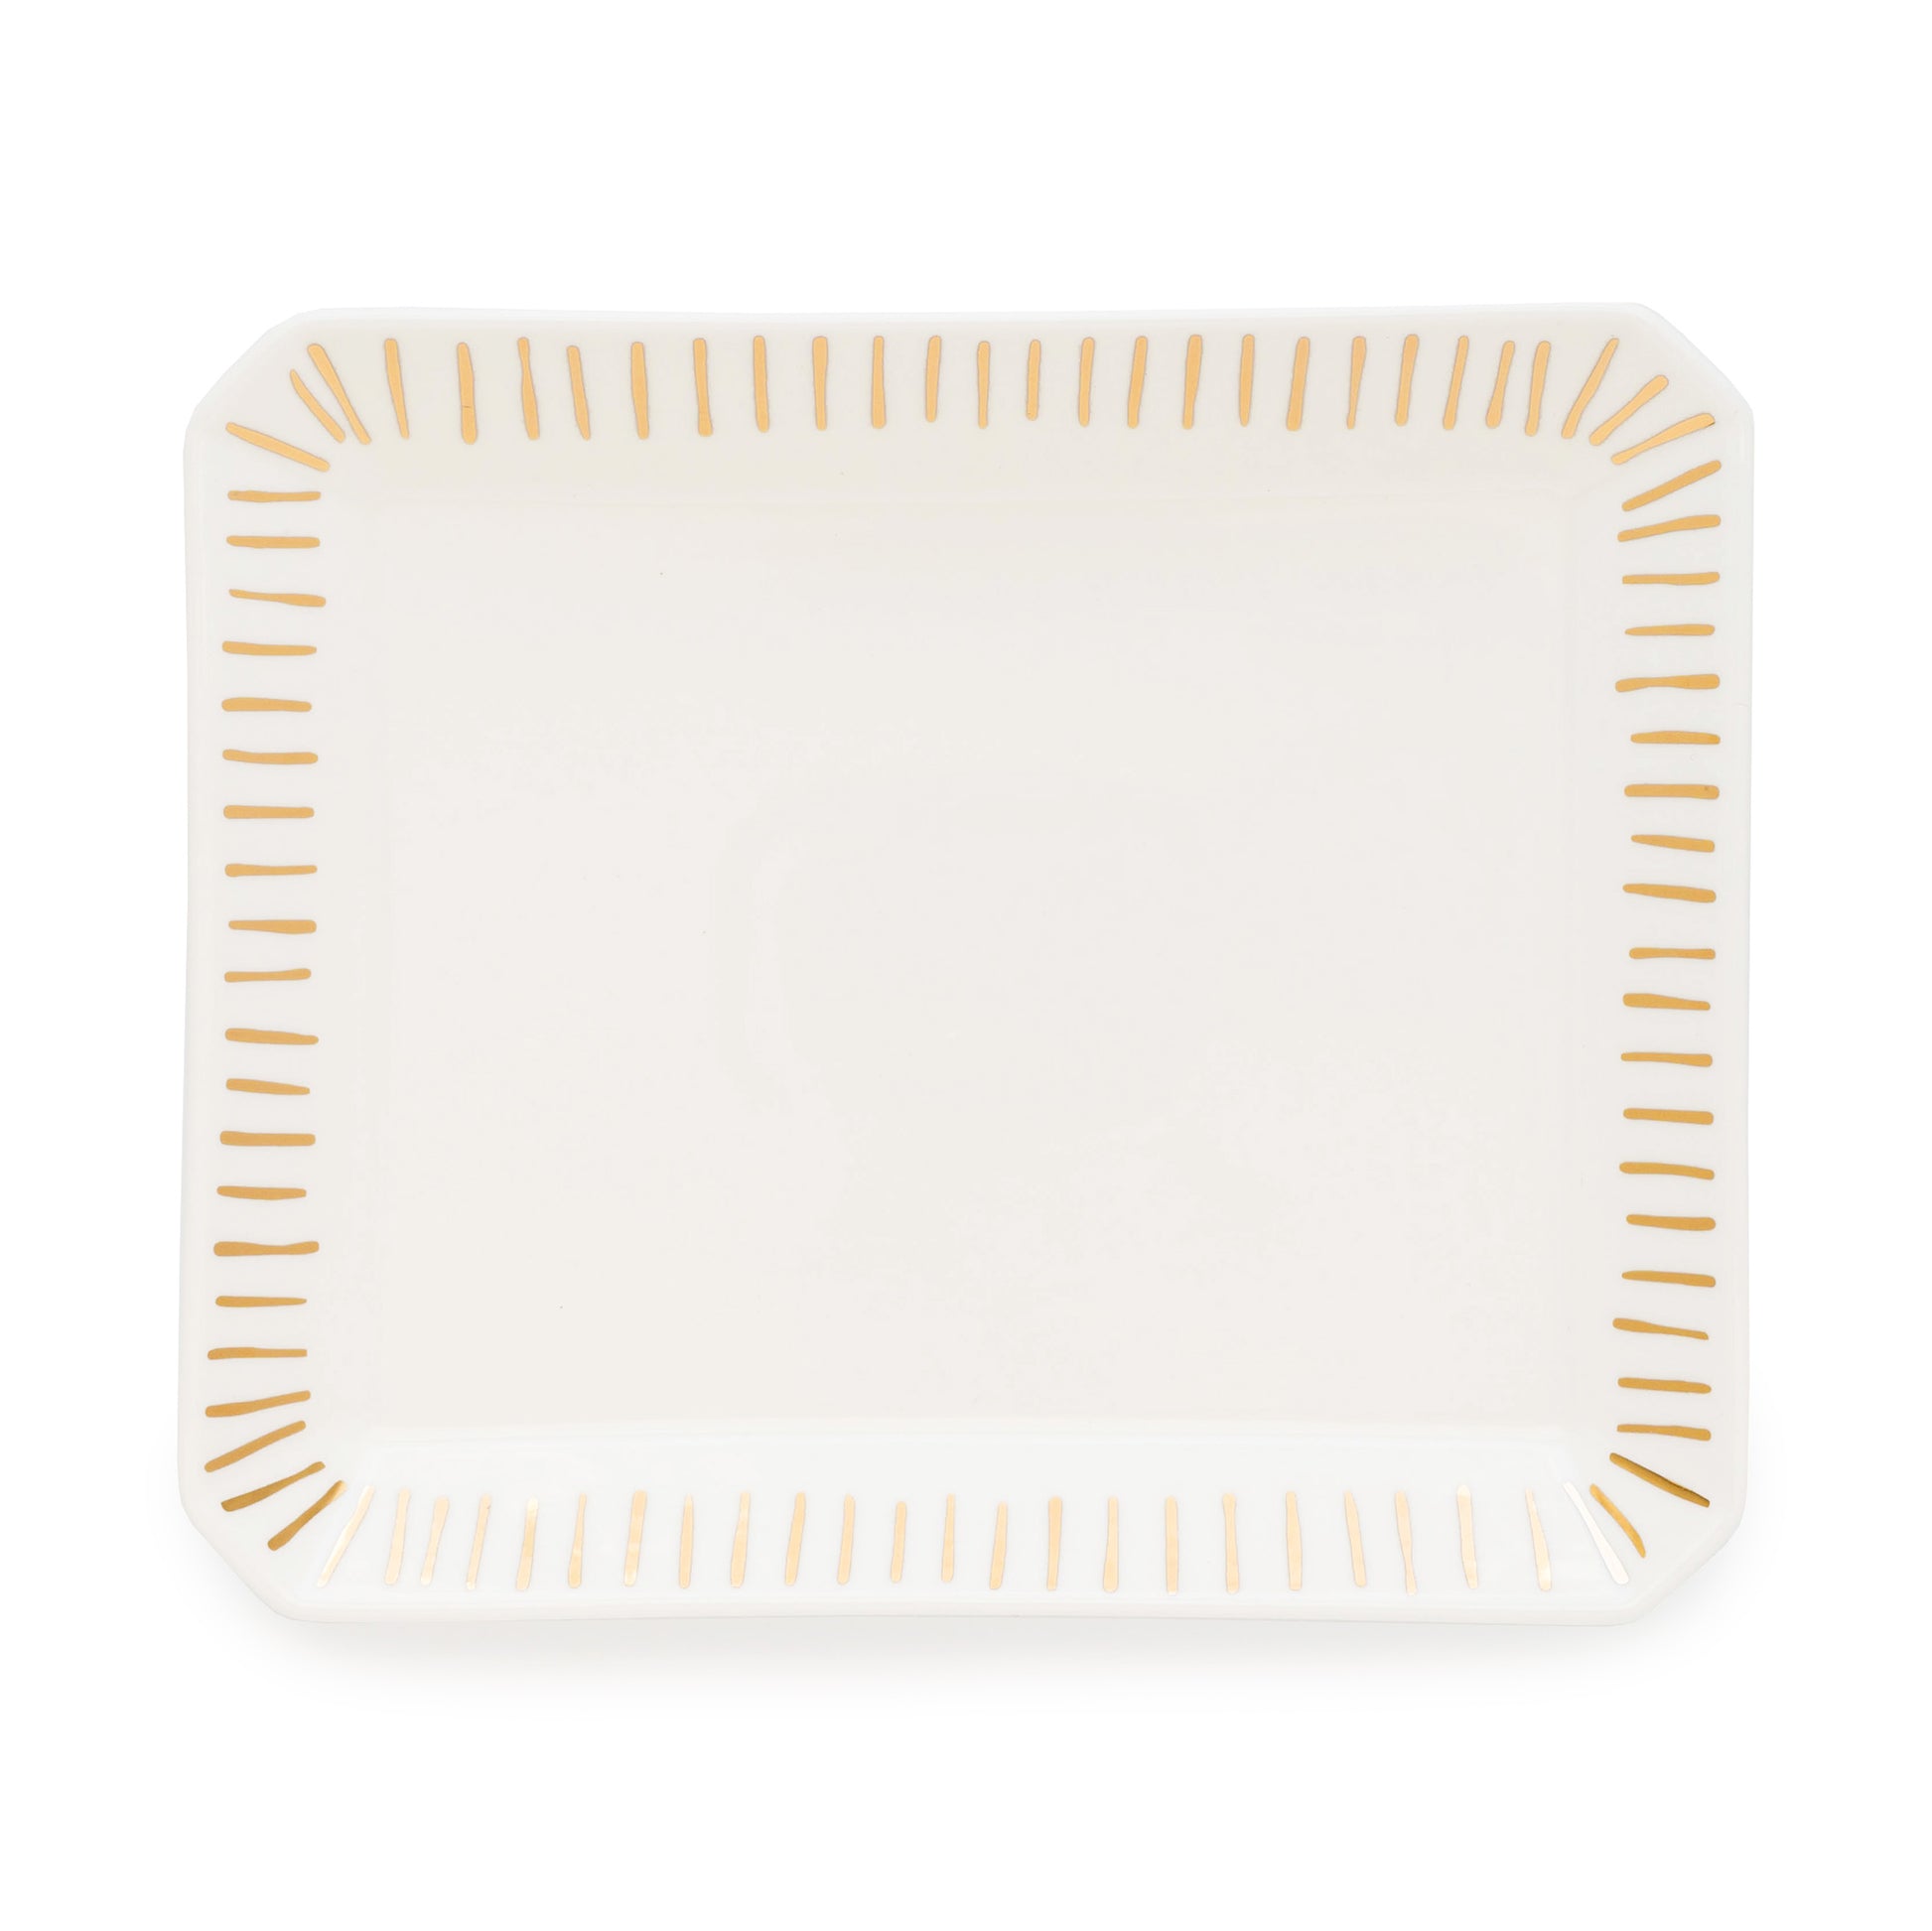 Large ceramic rectangular tray with gold dashed lines